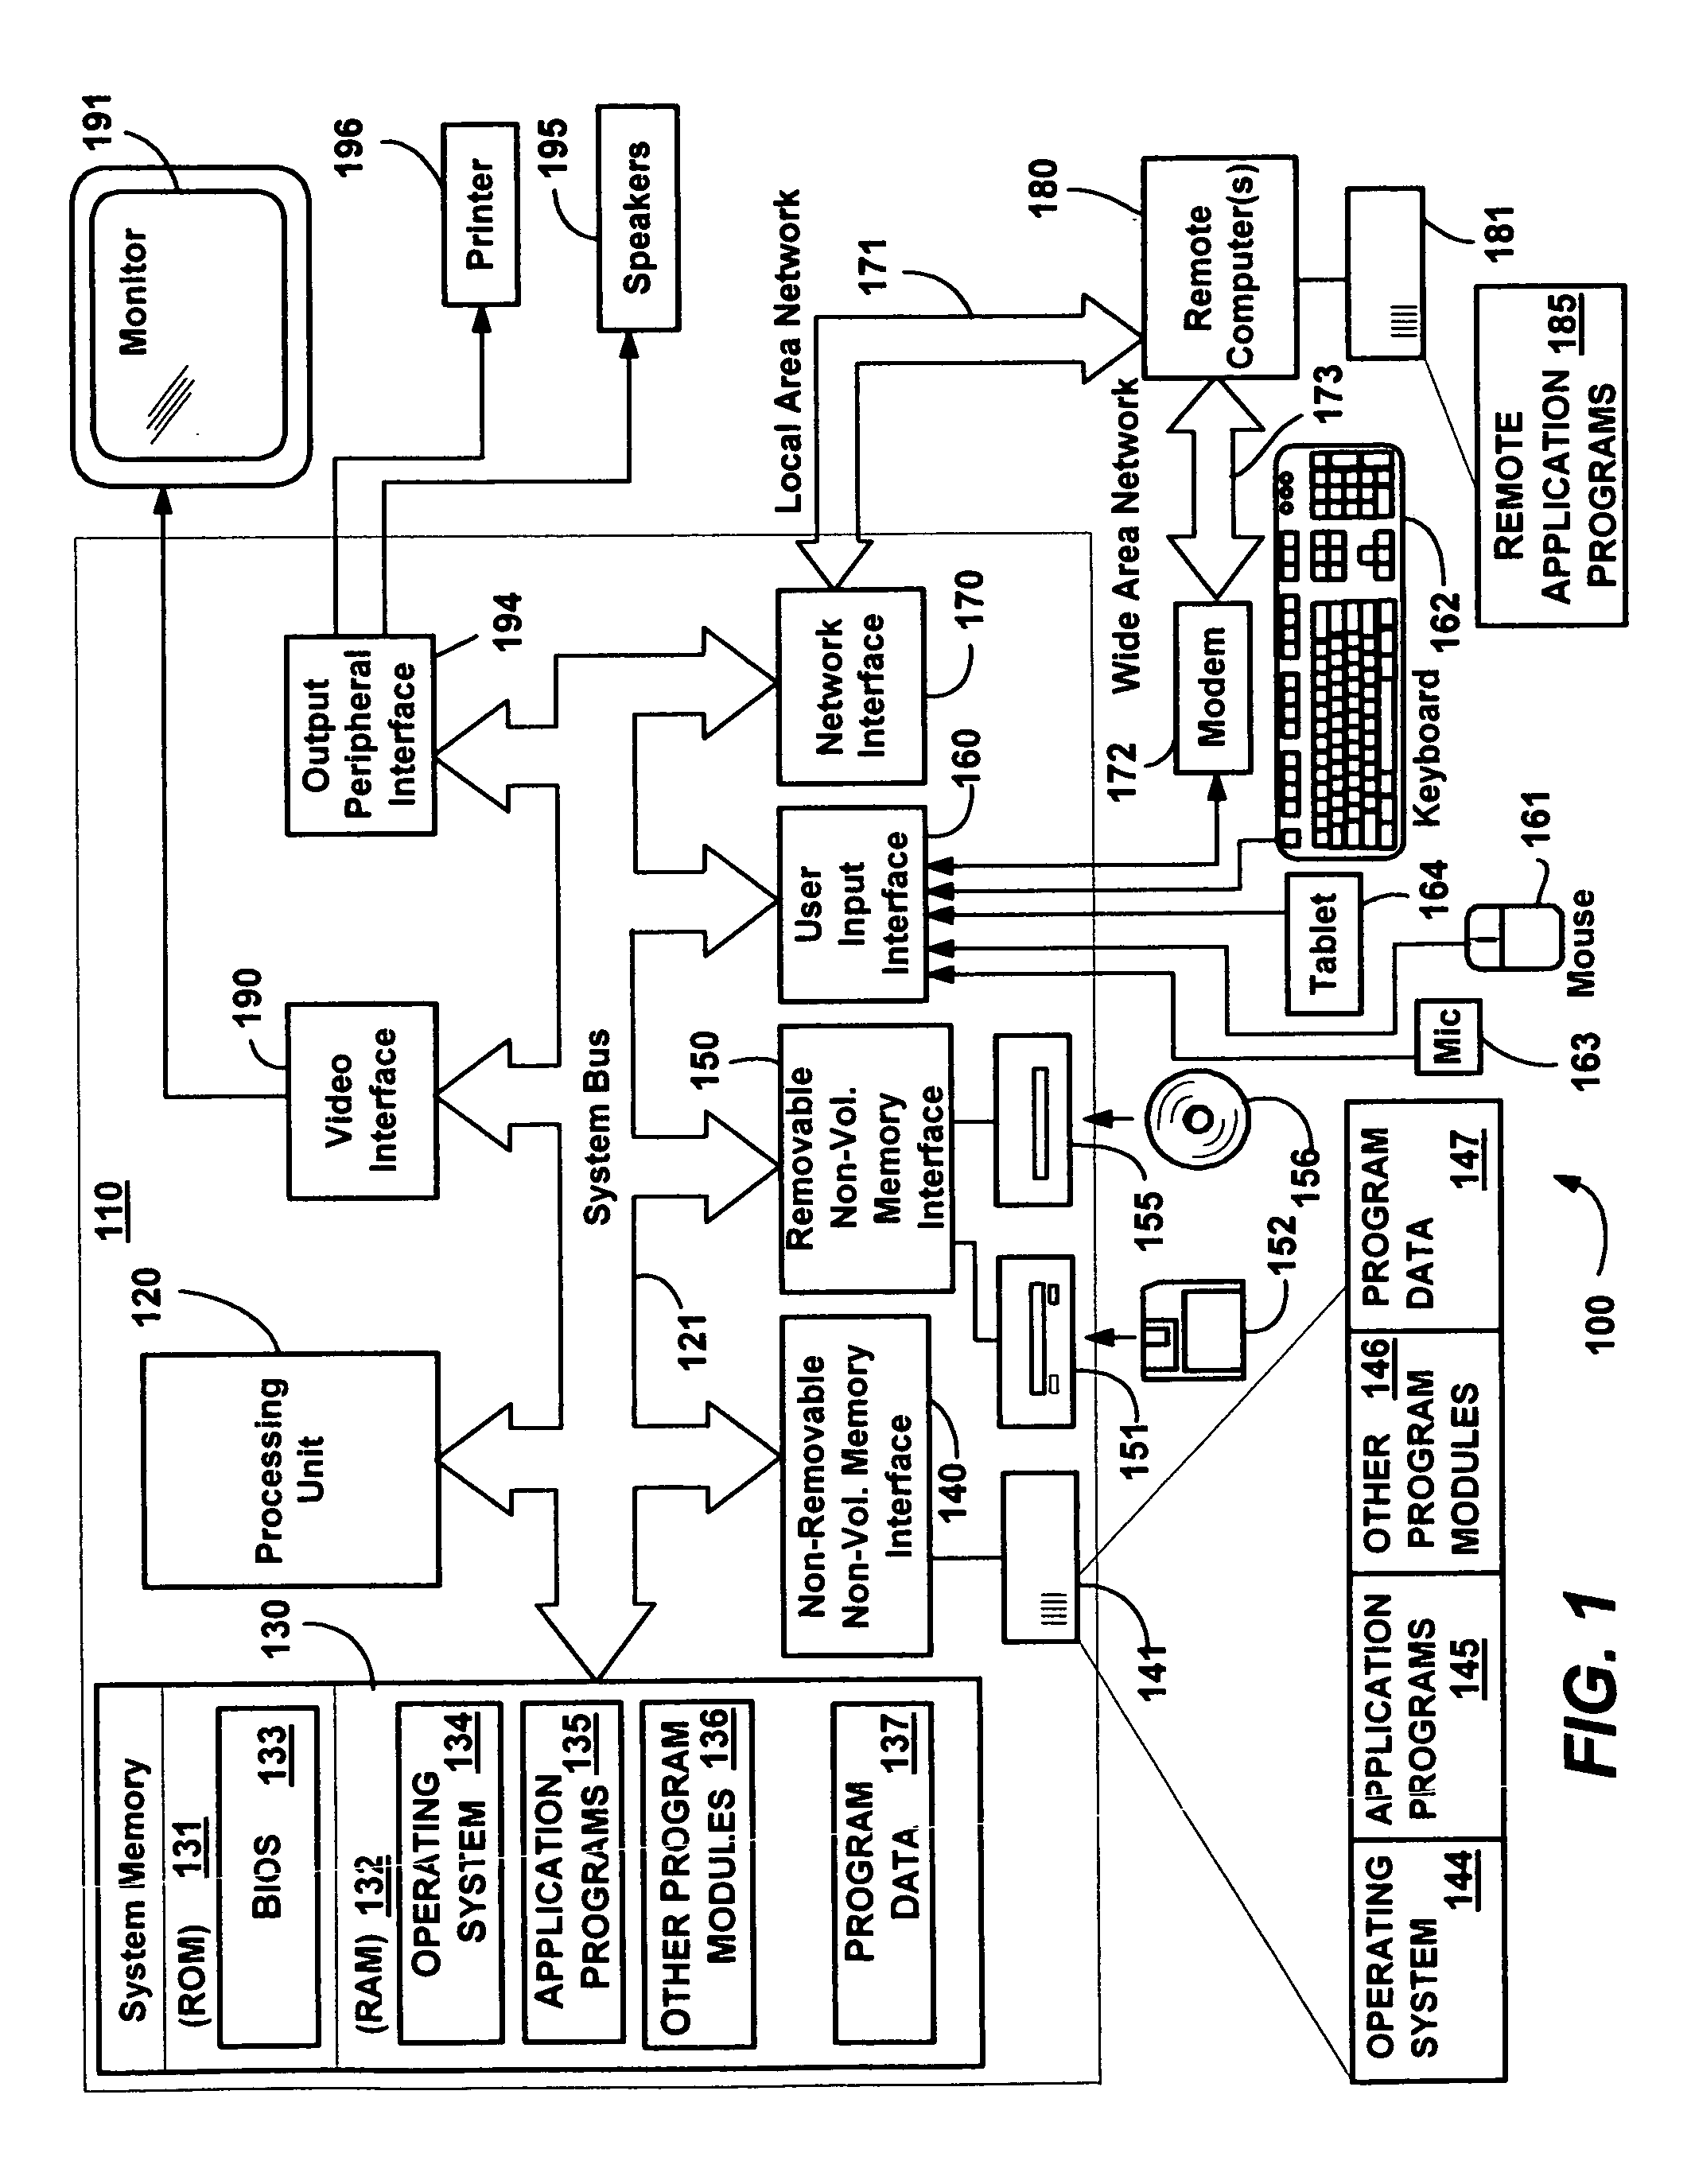 Schemas for a notification platform and related information services